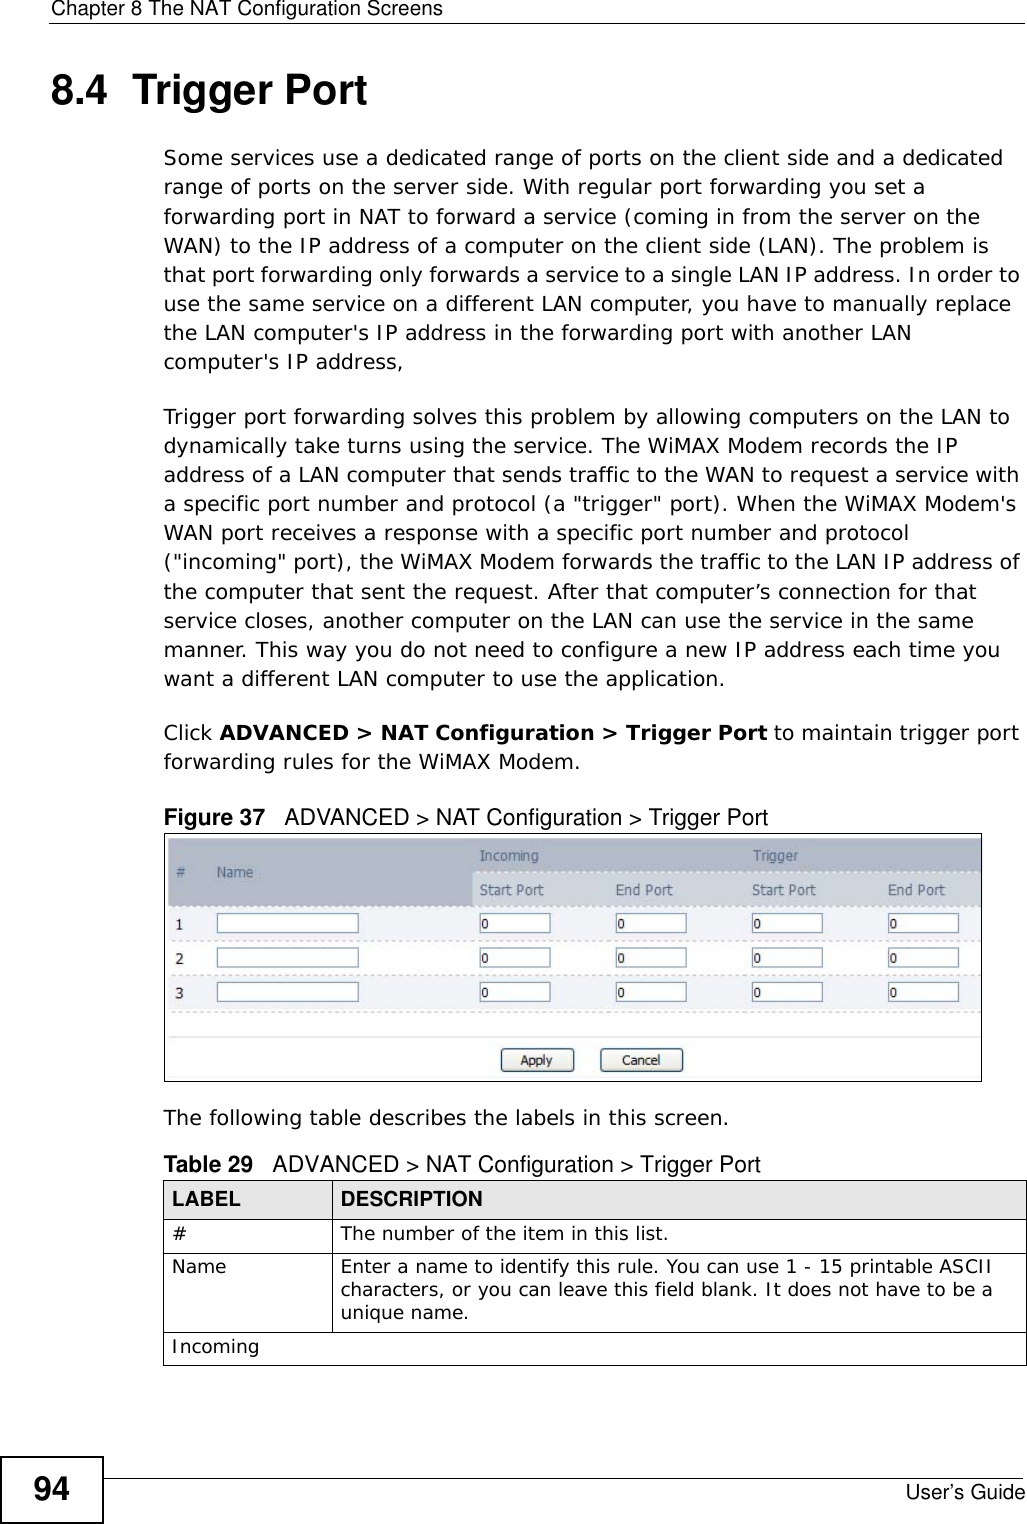 Chapter 8 The NAT Configuration ScreensUser’s Guide948.4  Trigger PortSome services use a dedicated range of ports on the client side and a dedicated range of ports on the server side. With regular port forwarding you set a forwarding port in NAT to forward a service (coming in from the server on the WAN) to the IP address of a computer on the client side (LAN). The problem is that port forwarding only forwards a service to a single LAN IP address. In order to use the same service on a different LAN computer, you have to manually replace the LAN computer&apos;s IP address in the forwarding port with another LAN computer&apos;s IP address, Trigger port forwarding solves this problem by allowing computers on the LAN to dynamically take turns using the service. The WiMAX Modem records the IP address of a LAN computer that sends traffic to the WAN to request a service with a specific port number and protocol (a &quot;trigger&quot; port). When the WiMAX Modem&apos;s WAN port receives a response with a specific port number and protocol (&quot;incoming&quot; port), the WiMAX Modem forwards the traffic to the LAN IP address of the computer that sent the request. After that computer’s connection for that service closes, another computer on the LAN can use the service in the same manner. This way you do not need to configure a new IP address each time you want a different LAN computer to use the application.Click ADVANCED &gt; NAT Configuration &gt; Trigger Port to maintain trigger port forwarding rules for the WiMAX Modem.Figure 37   ADVANCED &gt; NAT Configuration &gt; Trigger PortThe following table describes the labels in this screen.Table 29   ADVANCED &gt; NAT Configuration &gt; Trigger PortLABEL DESCRIPTION#The number of the item in this list.Name Enter a name to identify this rule. You can use 1 - 15 printable ASCII characters, or you can leave this field blank. It does not have to be a unique name.Incoming